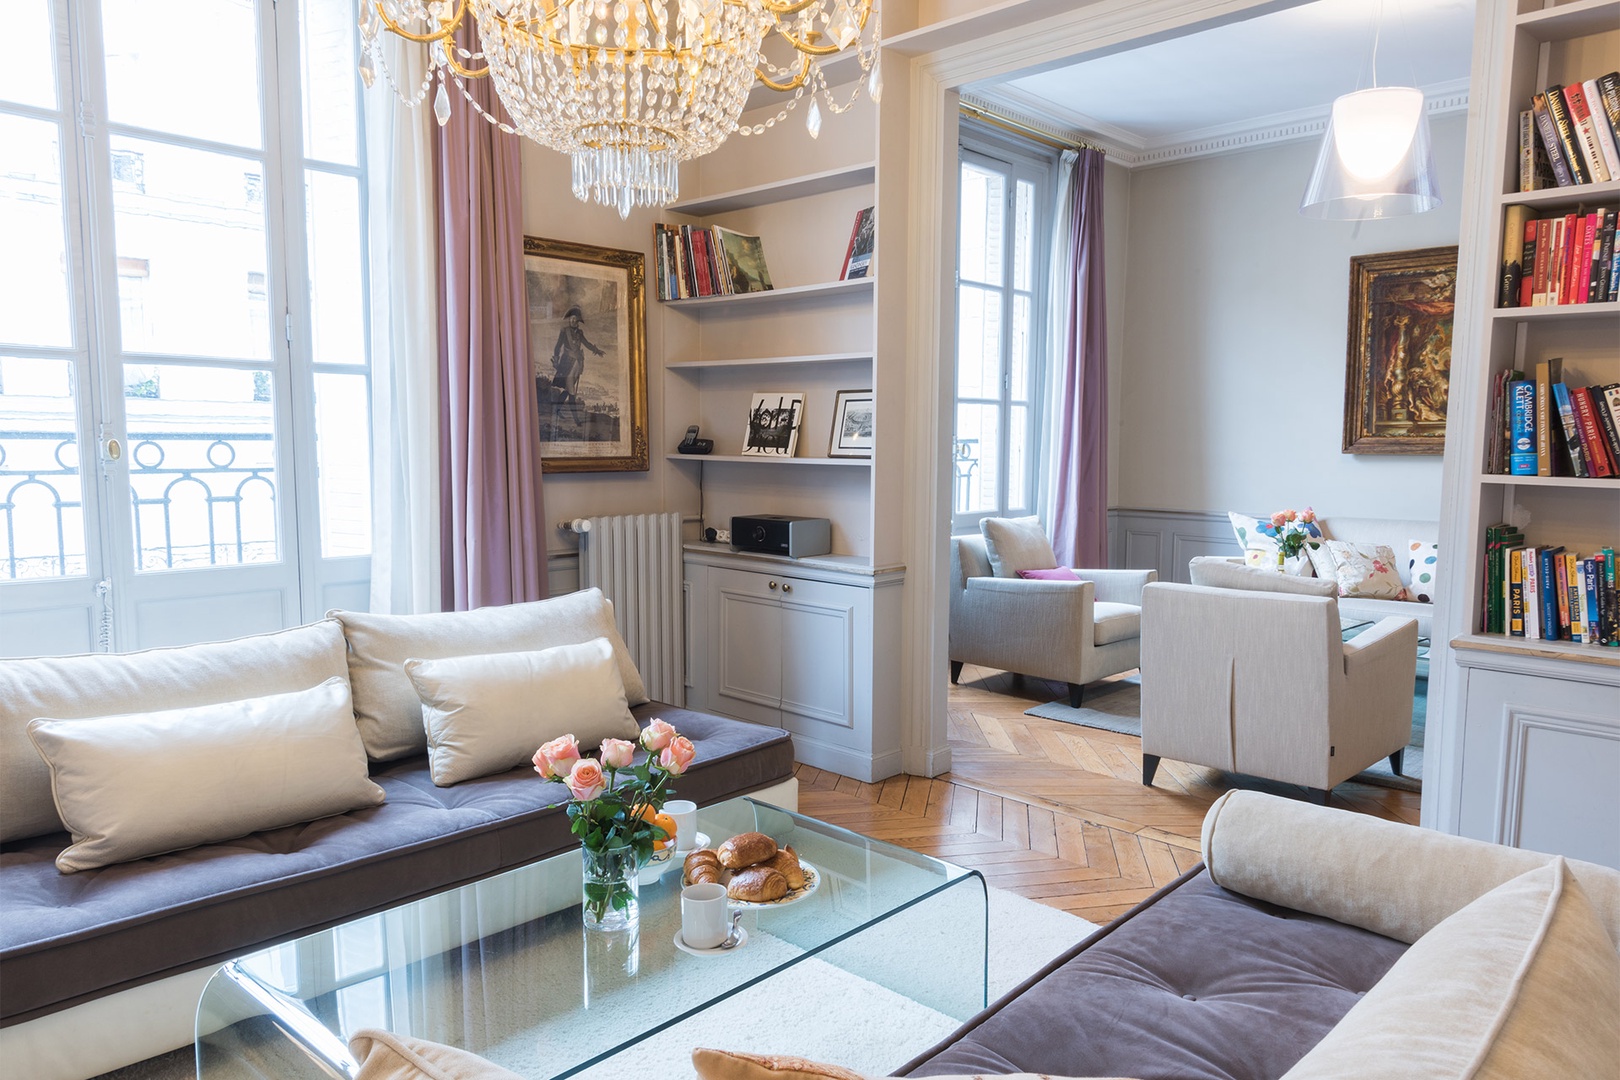 Make yourself at home in this elegant and spacious apartment.